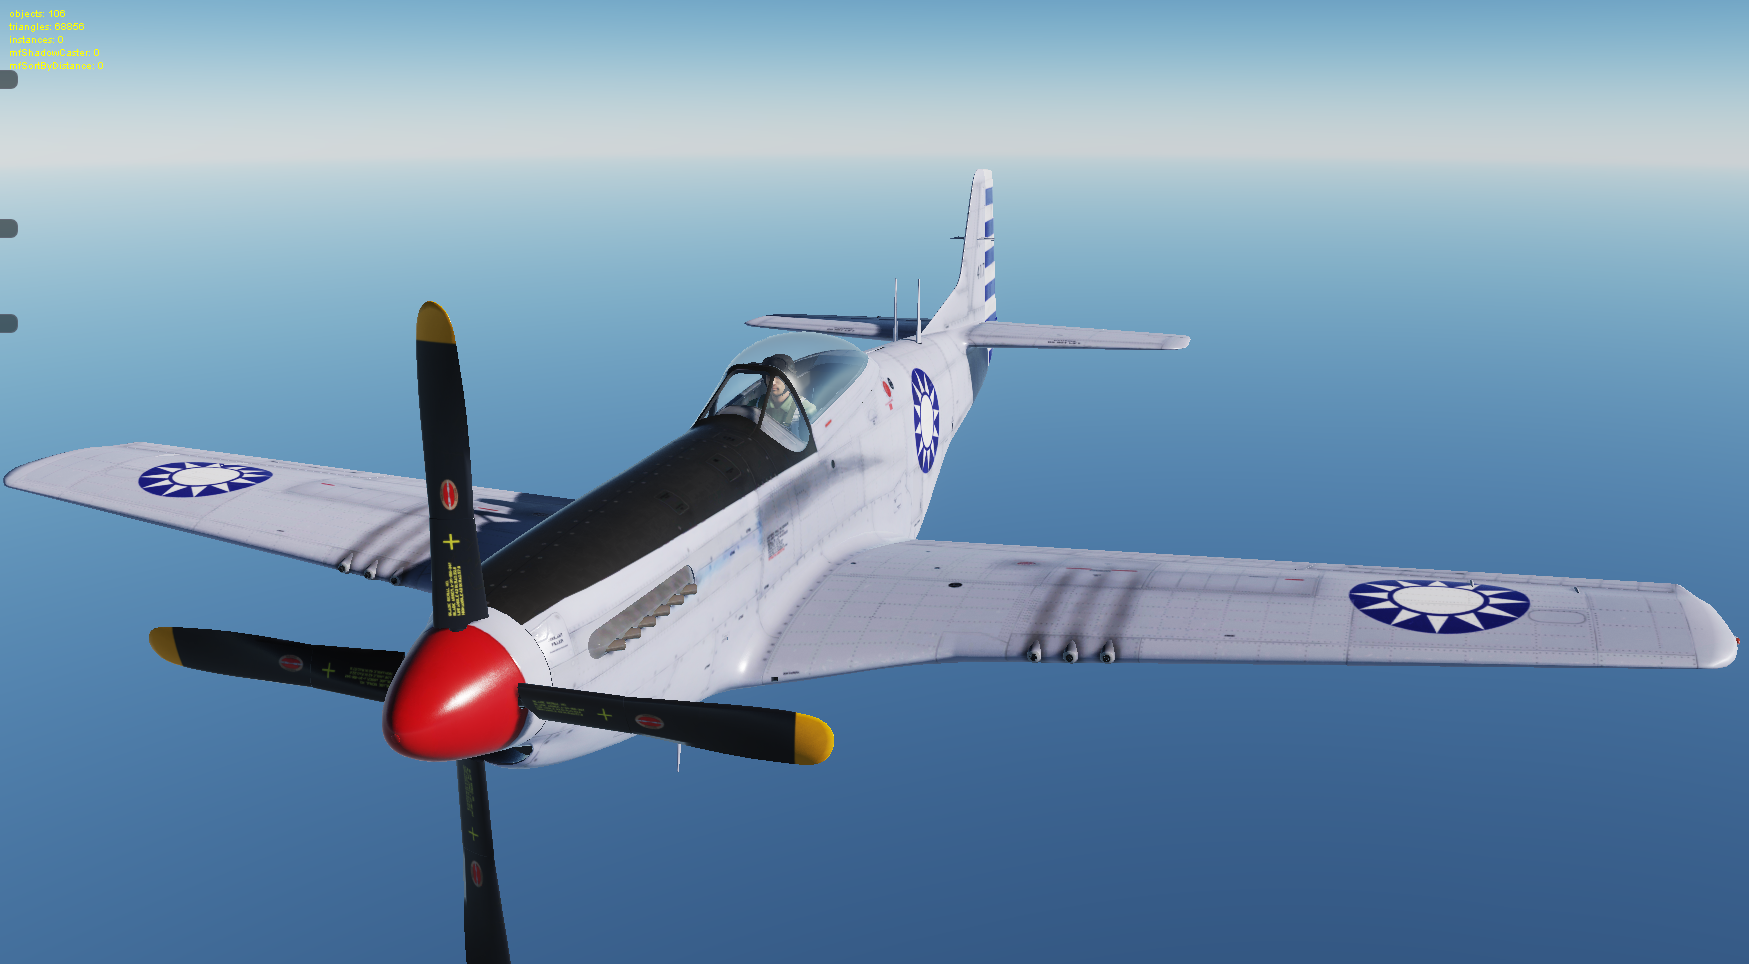 ROCAF(CHINA) P-51 WW2 ERA SKIN. Can also use for TF-51.